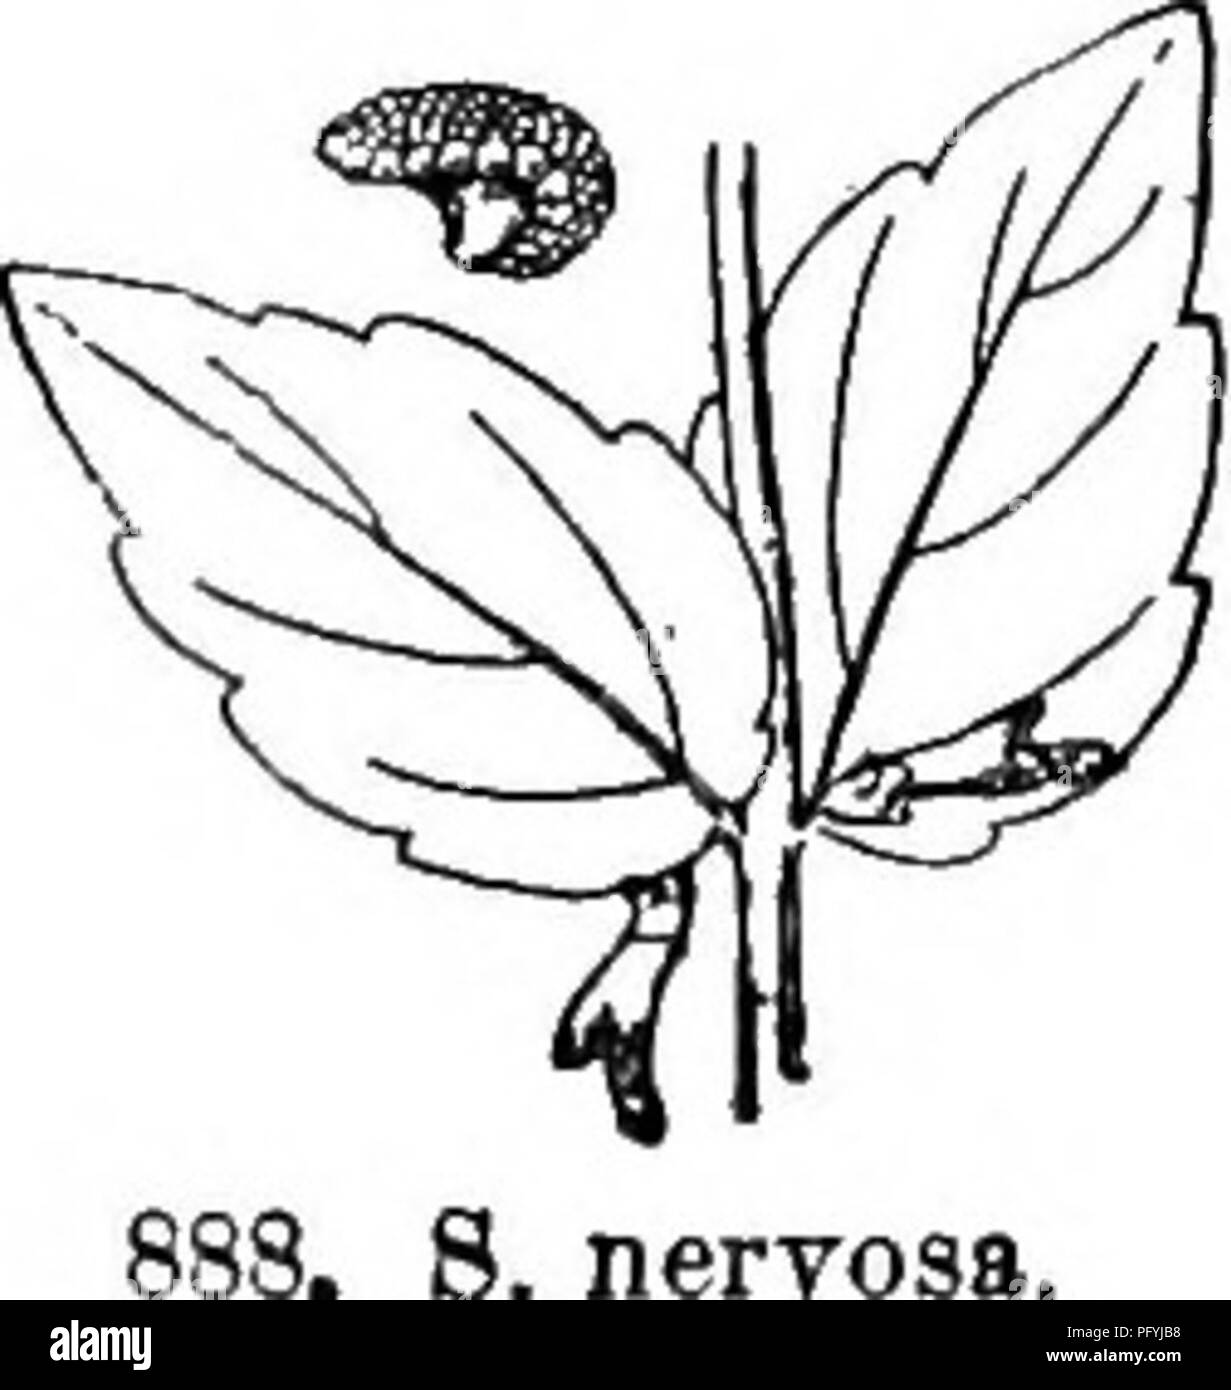 . Gray's new manual of botany. A handbook of the flowering plants and ferns of the central and northeastern United States and adjacent Canada. Botany. 696 LABIATAE (mint FAMILY) t- -^ Flowers 5-10 mm. long; leaves at most 2 cm. long. 11. S. pdrvula Michx. Herbaceous; subterranean stolons monilifo'f m-tuber- iferous; pubescent throughout with spreading often viscid hairs, dwarf (0.8-3 dm. high), branched and spreading ; all but the lower leaves sessile and entire or sparingly toothed, the lowest round-ovate, the others ovate or lance-ovate, slightly heart-shaped ; flowers axillary. (Including v Stock Photo